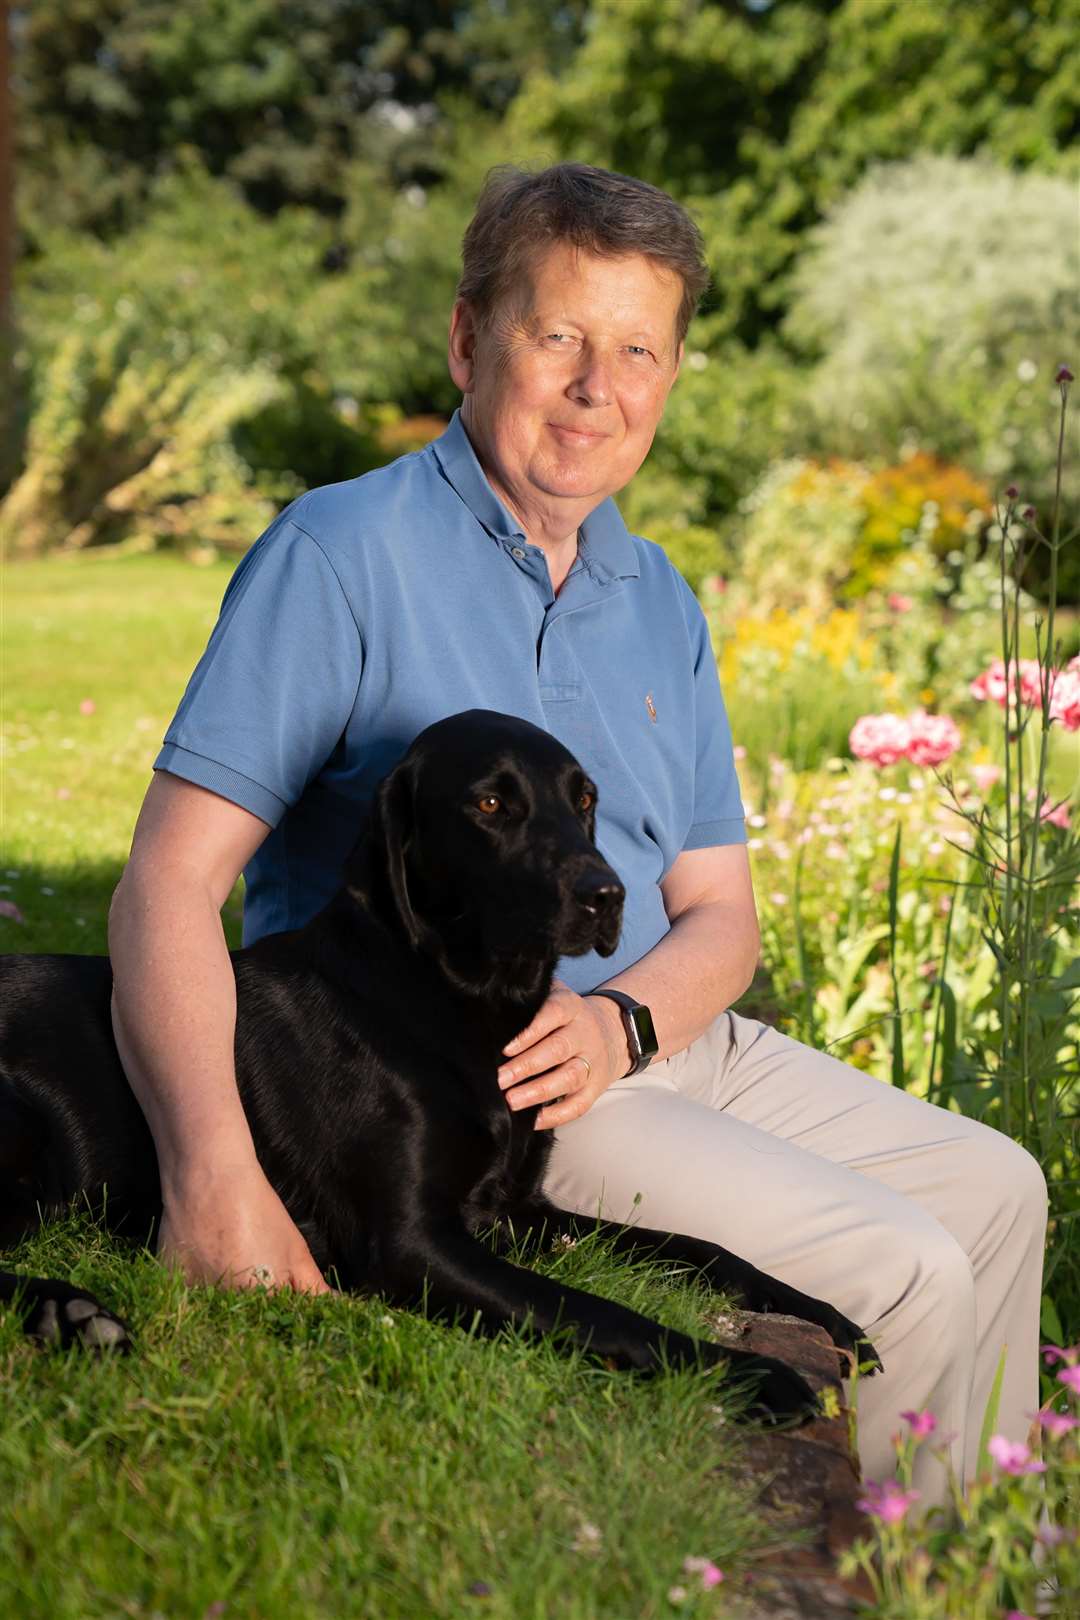 Bill Turnbull was diagnosed with prostate cancer in 2017 (Pete Dadds/Channel 4)